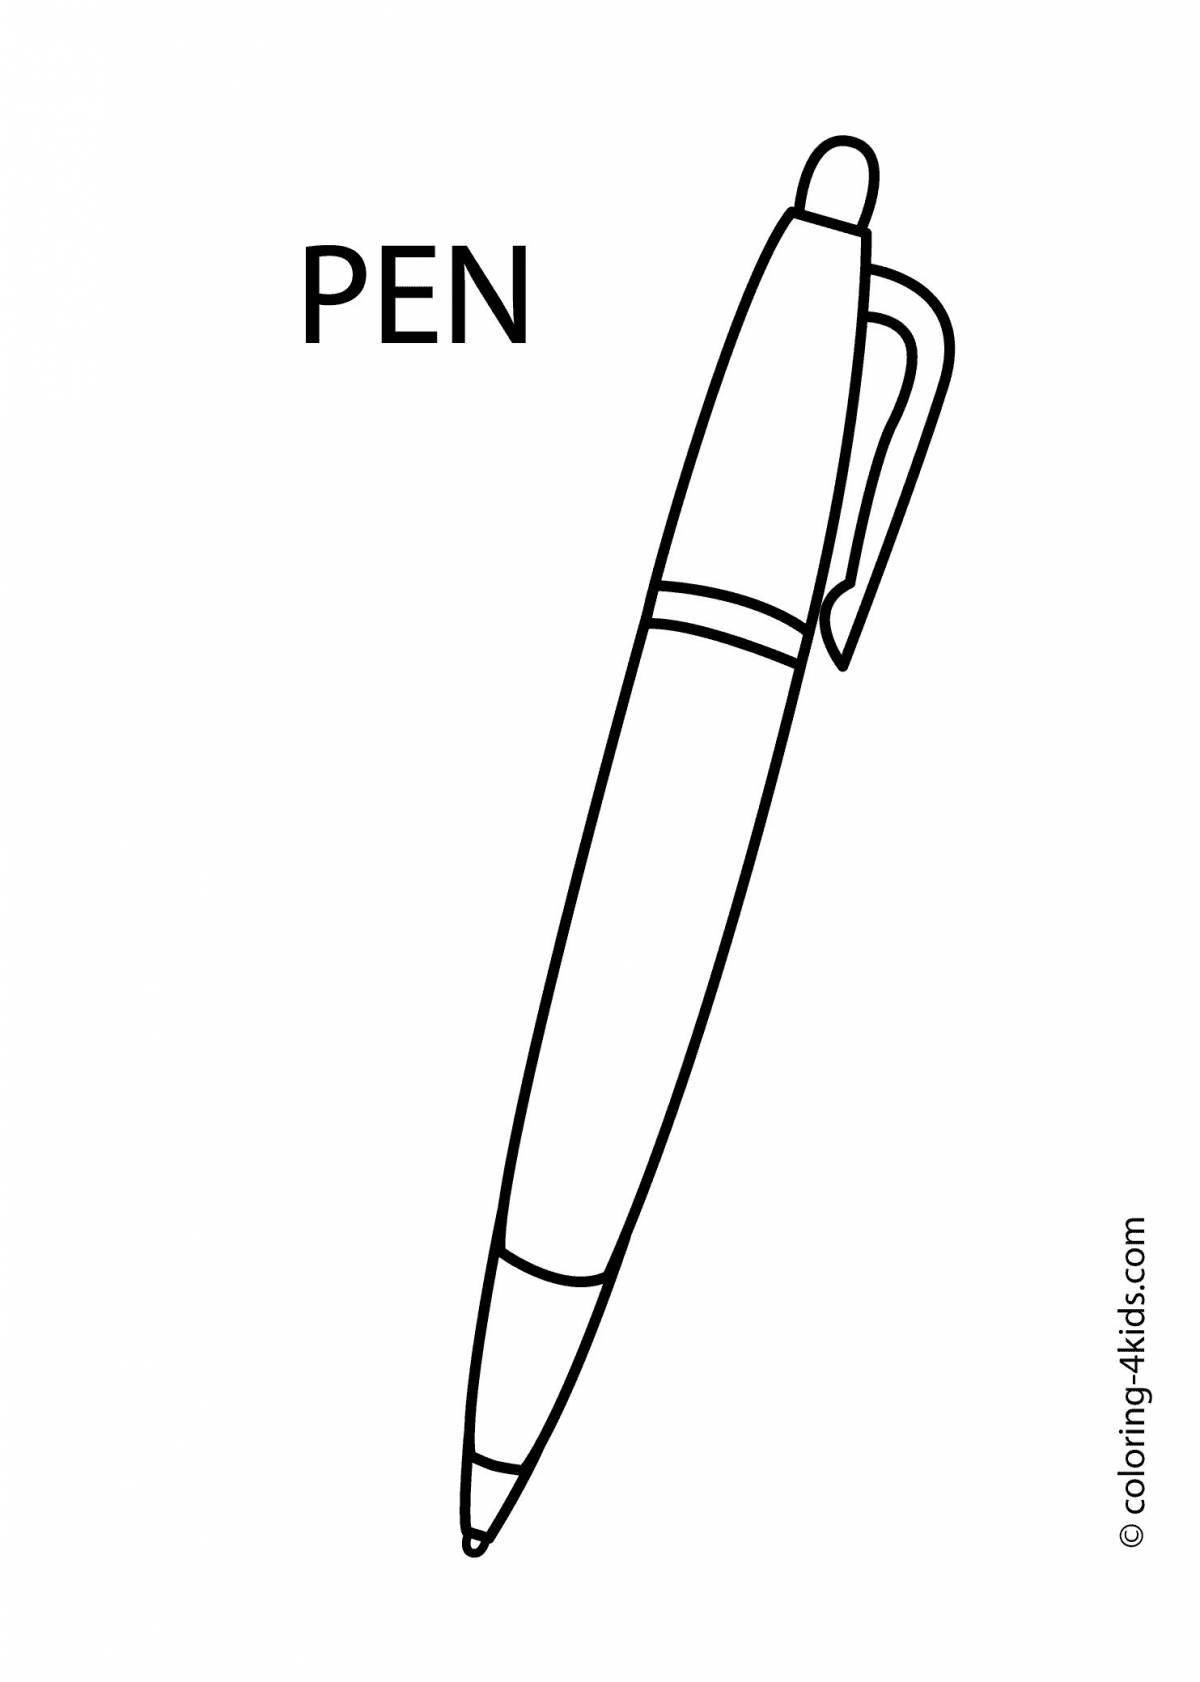 Colorful pens coloring page for the little ones